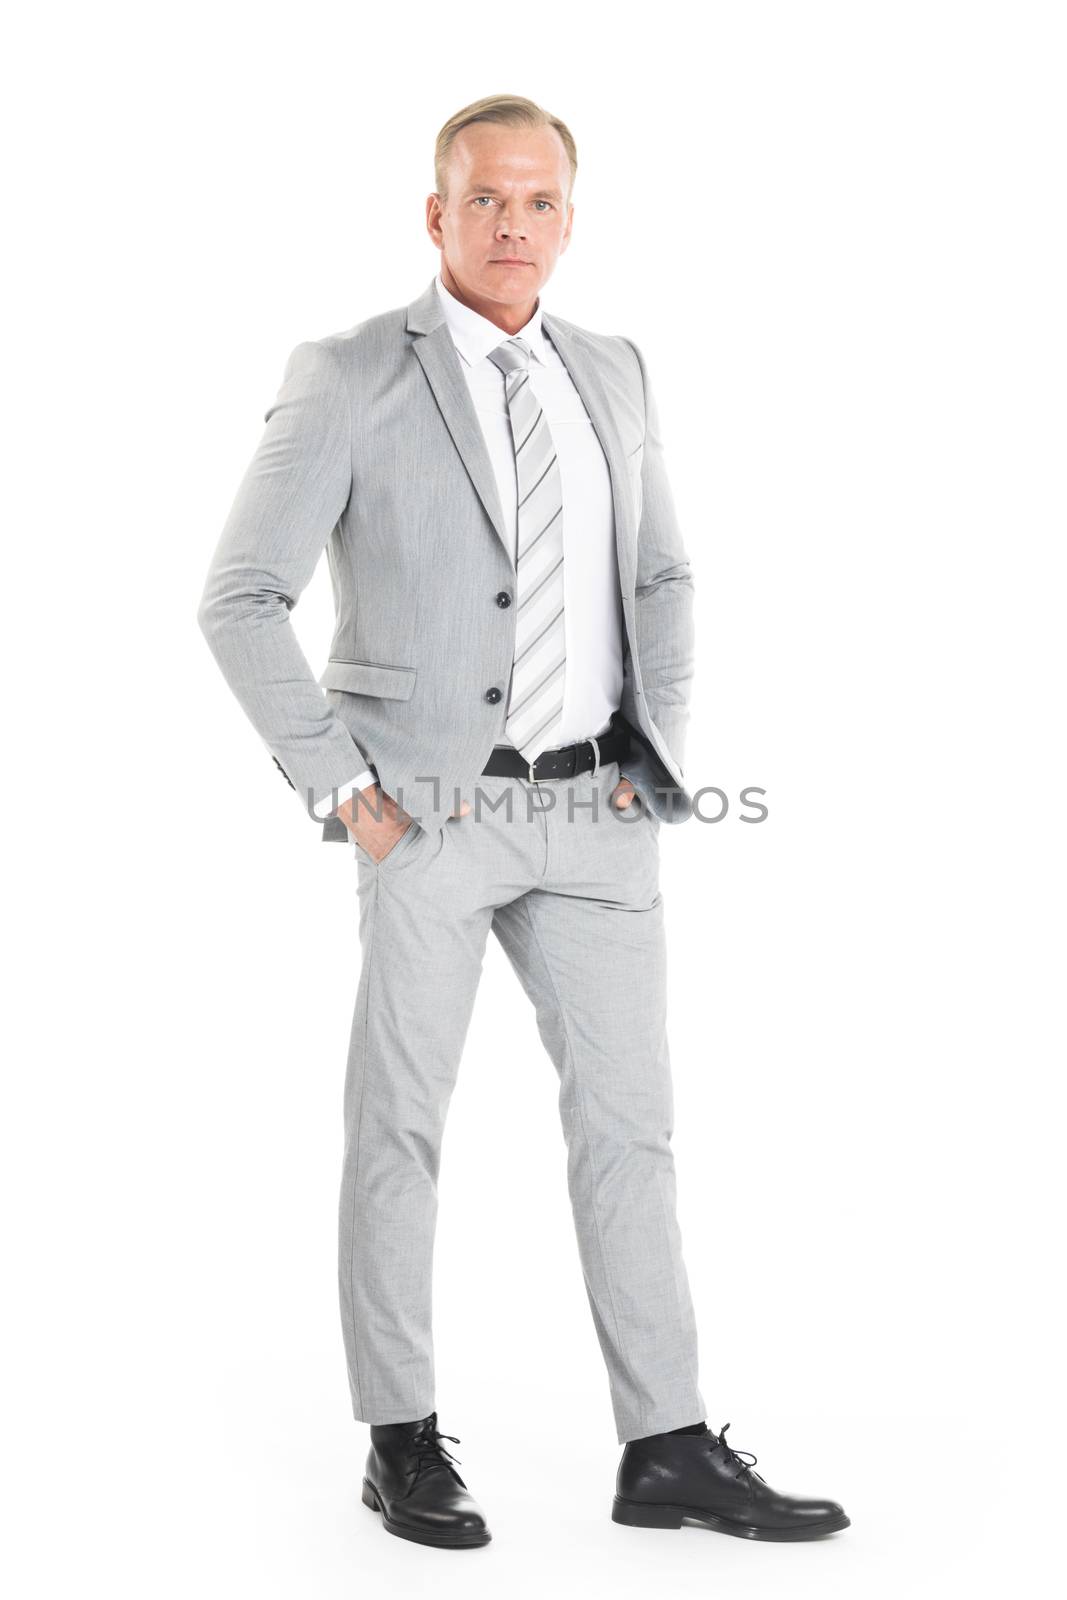 Portrait of mature business man in gray suit isolated on white background